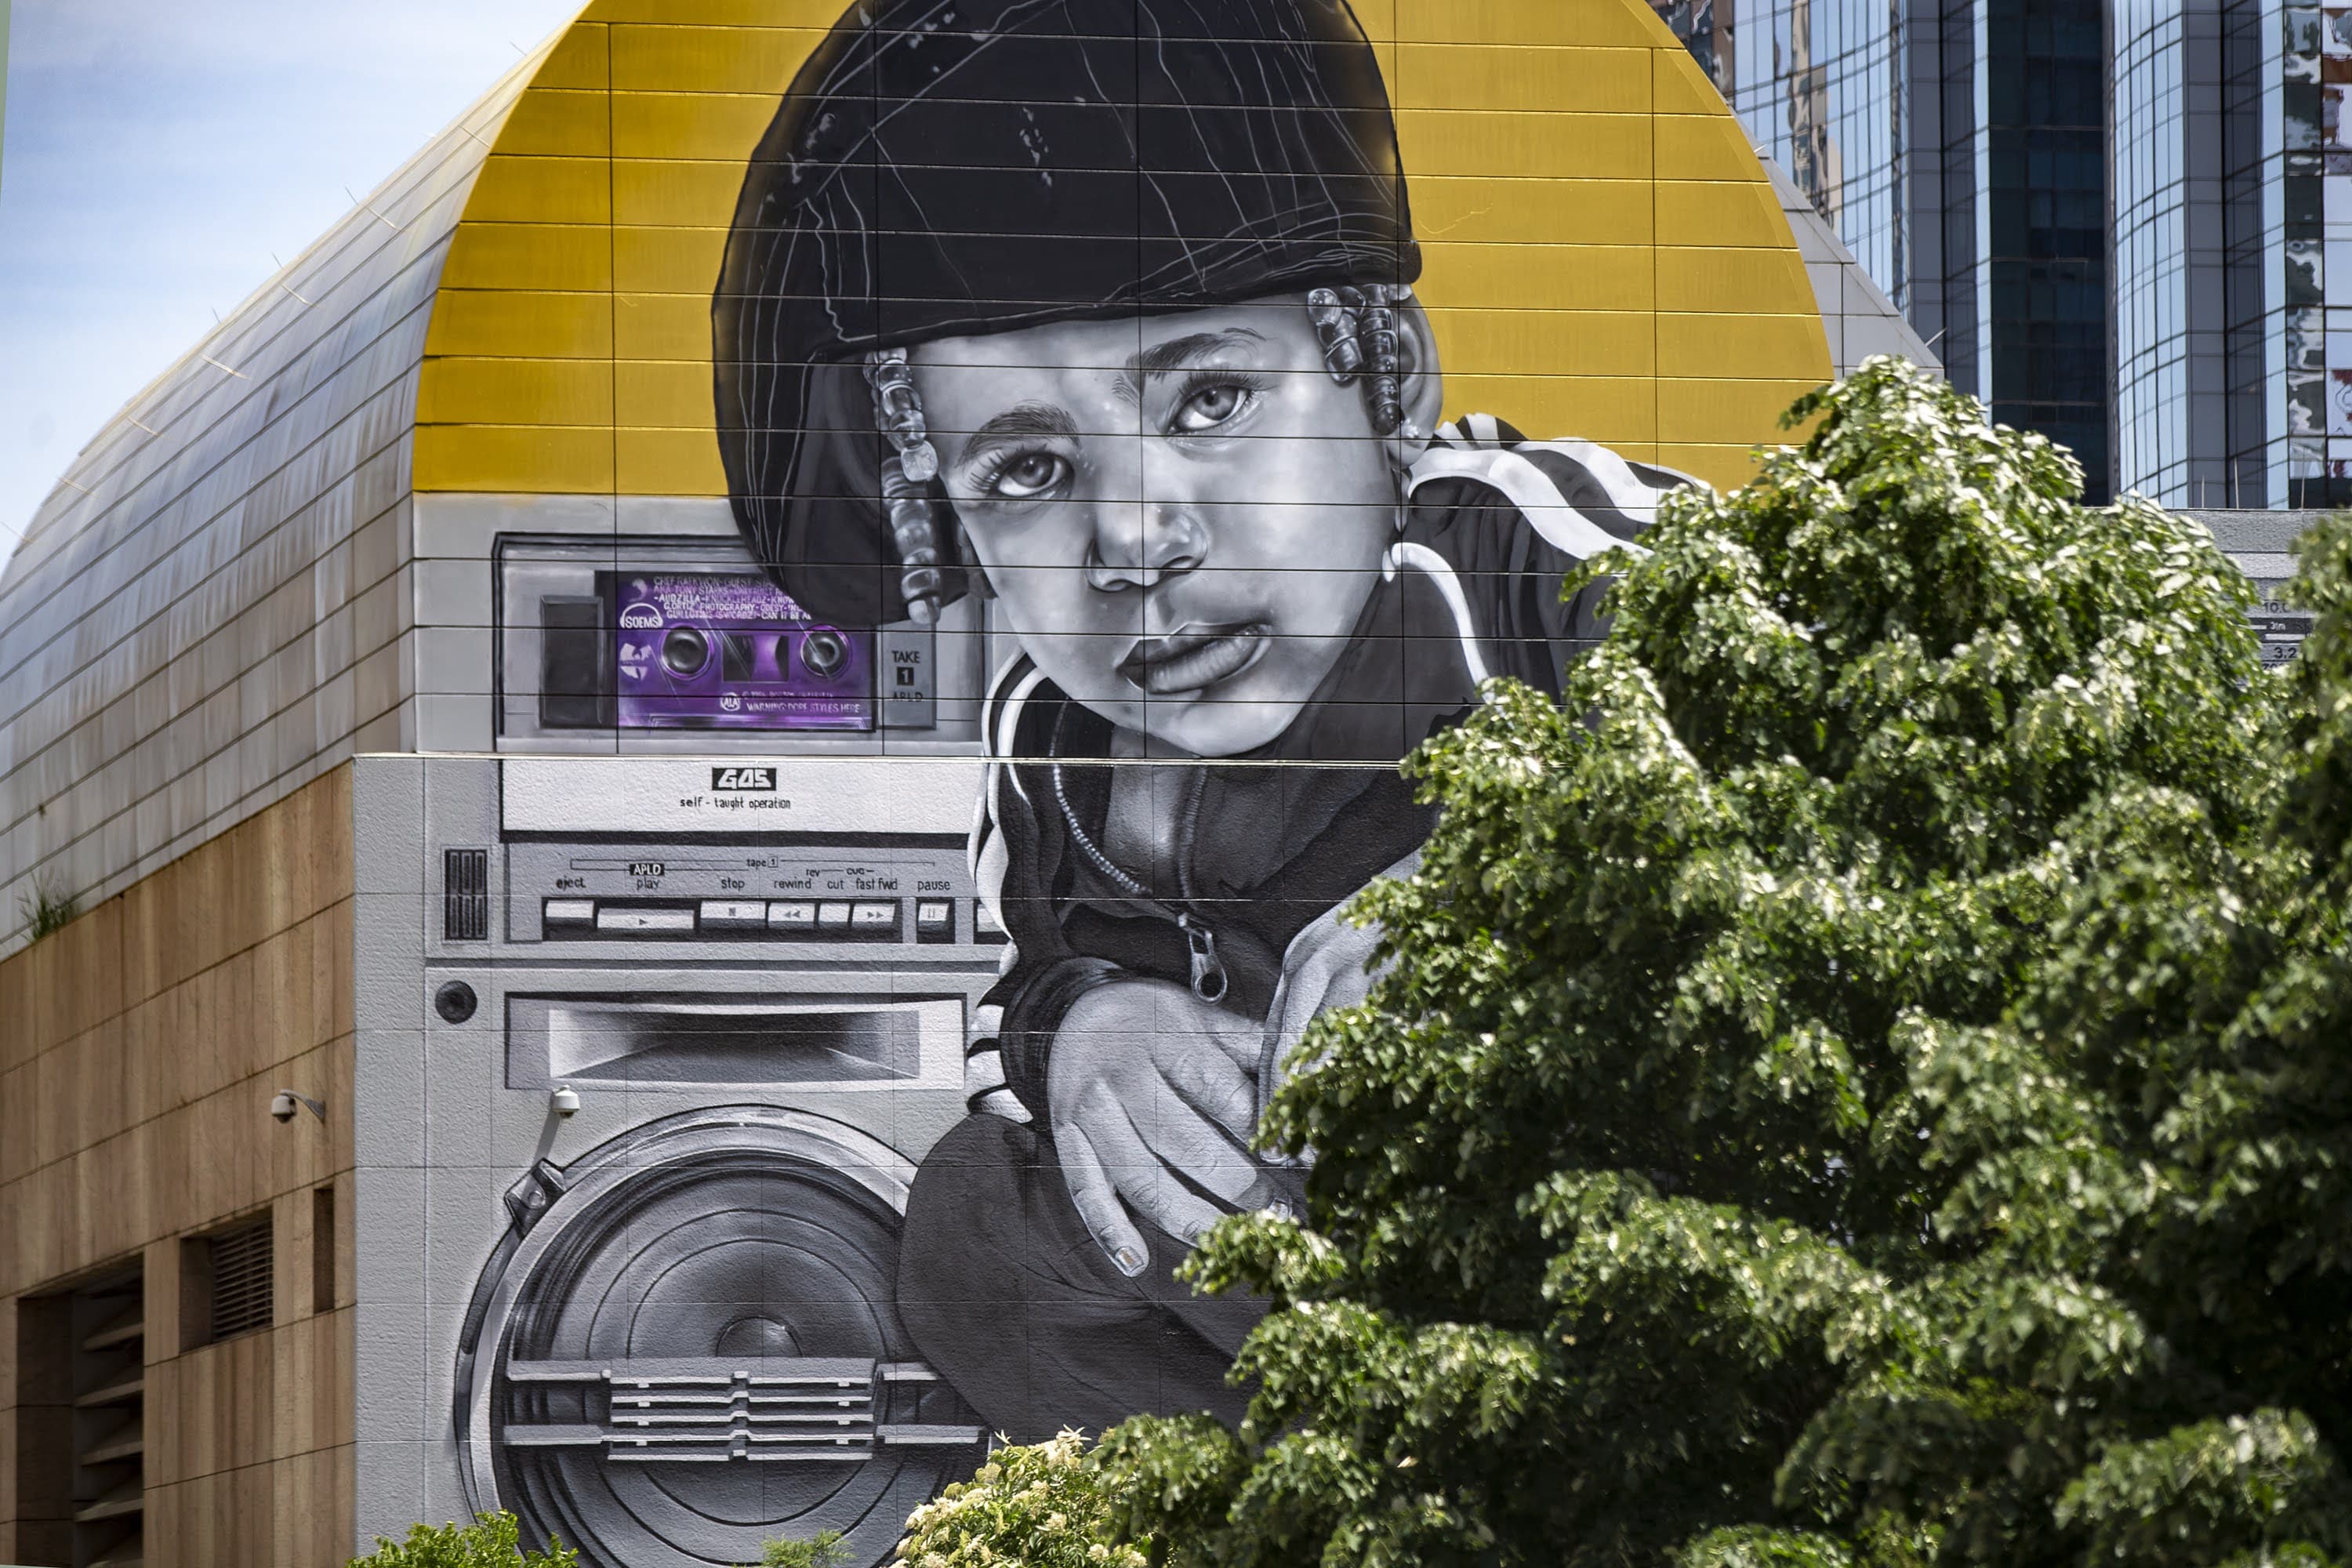 The likeness of the daughter of muralist Rob “ProBlak” Gibbs peers around the trees in Dewey Square in Gibbs’ work “Breathe Life Together,” the next mural to be featured on the façade of the Dewey Square Tunnel Air Intake Structure on the Rose Kennedy Greenway. (Jesse Costa/WBUR)